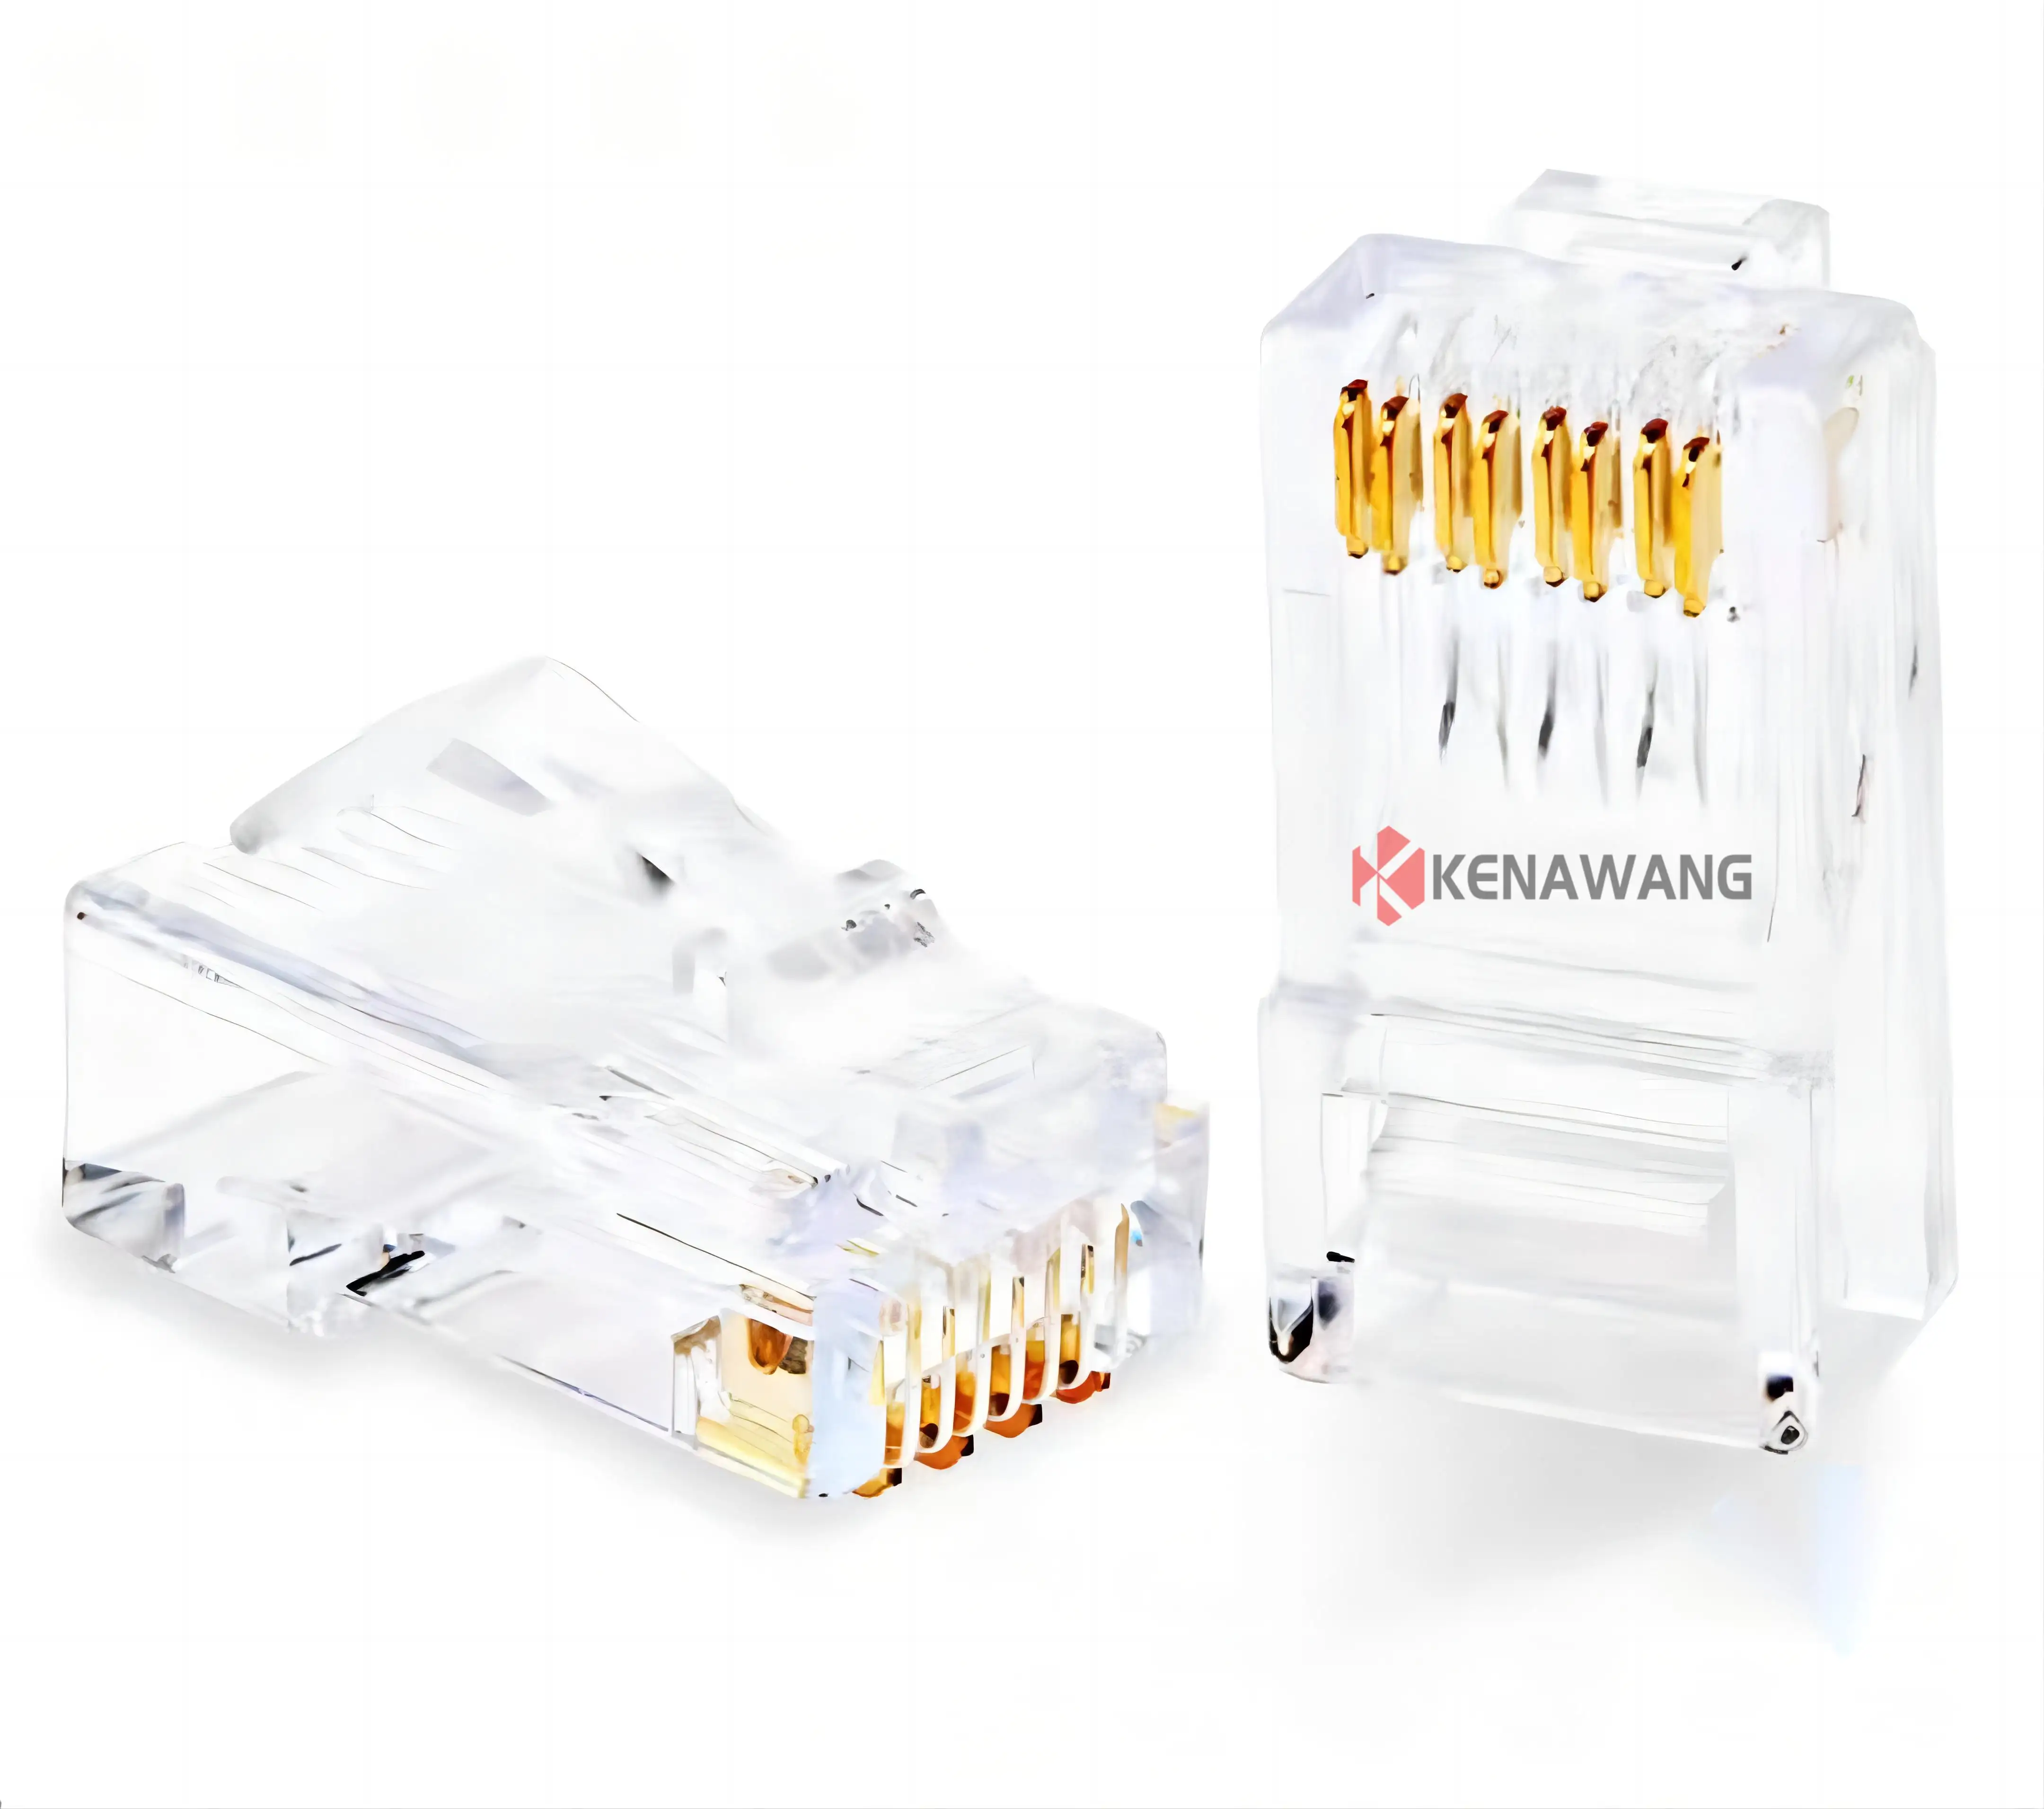 UTP Cat6 Cat5 Cat5e RJ11 RJ45 Connector Stranded Network Cable terminal 8P8C Gold Plated Modular Plug